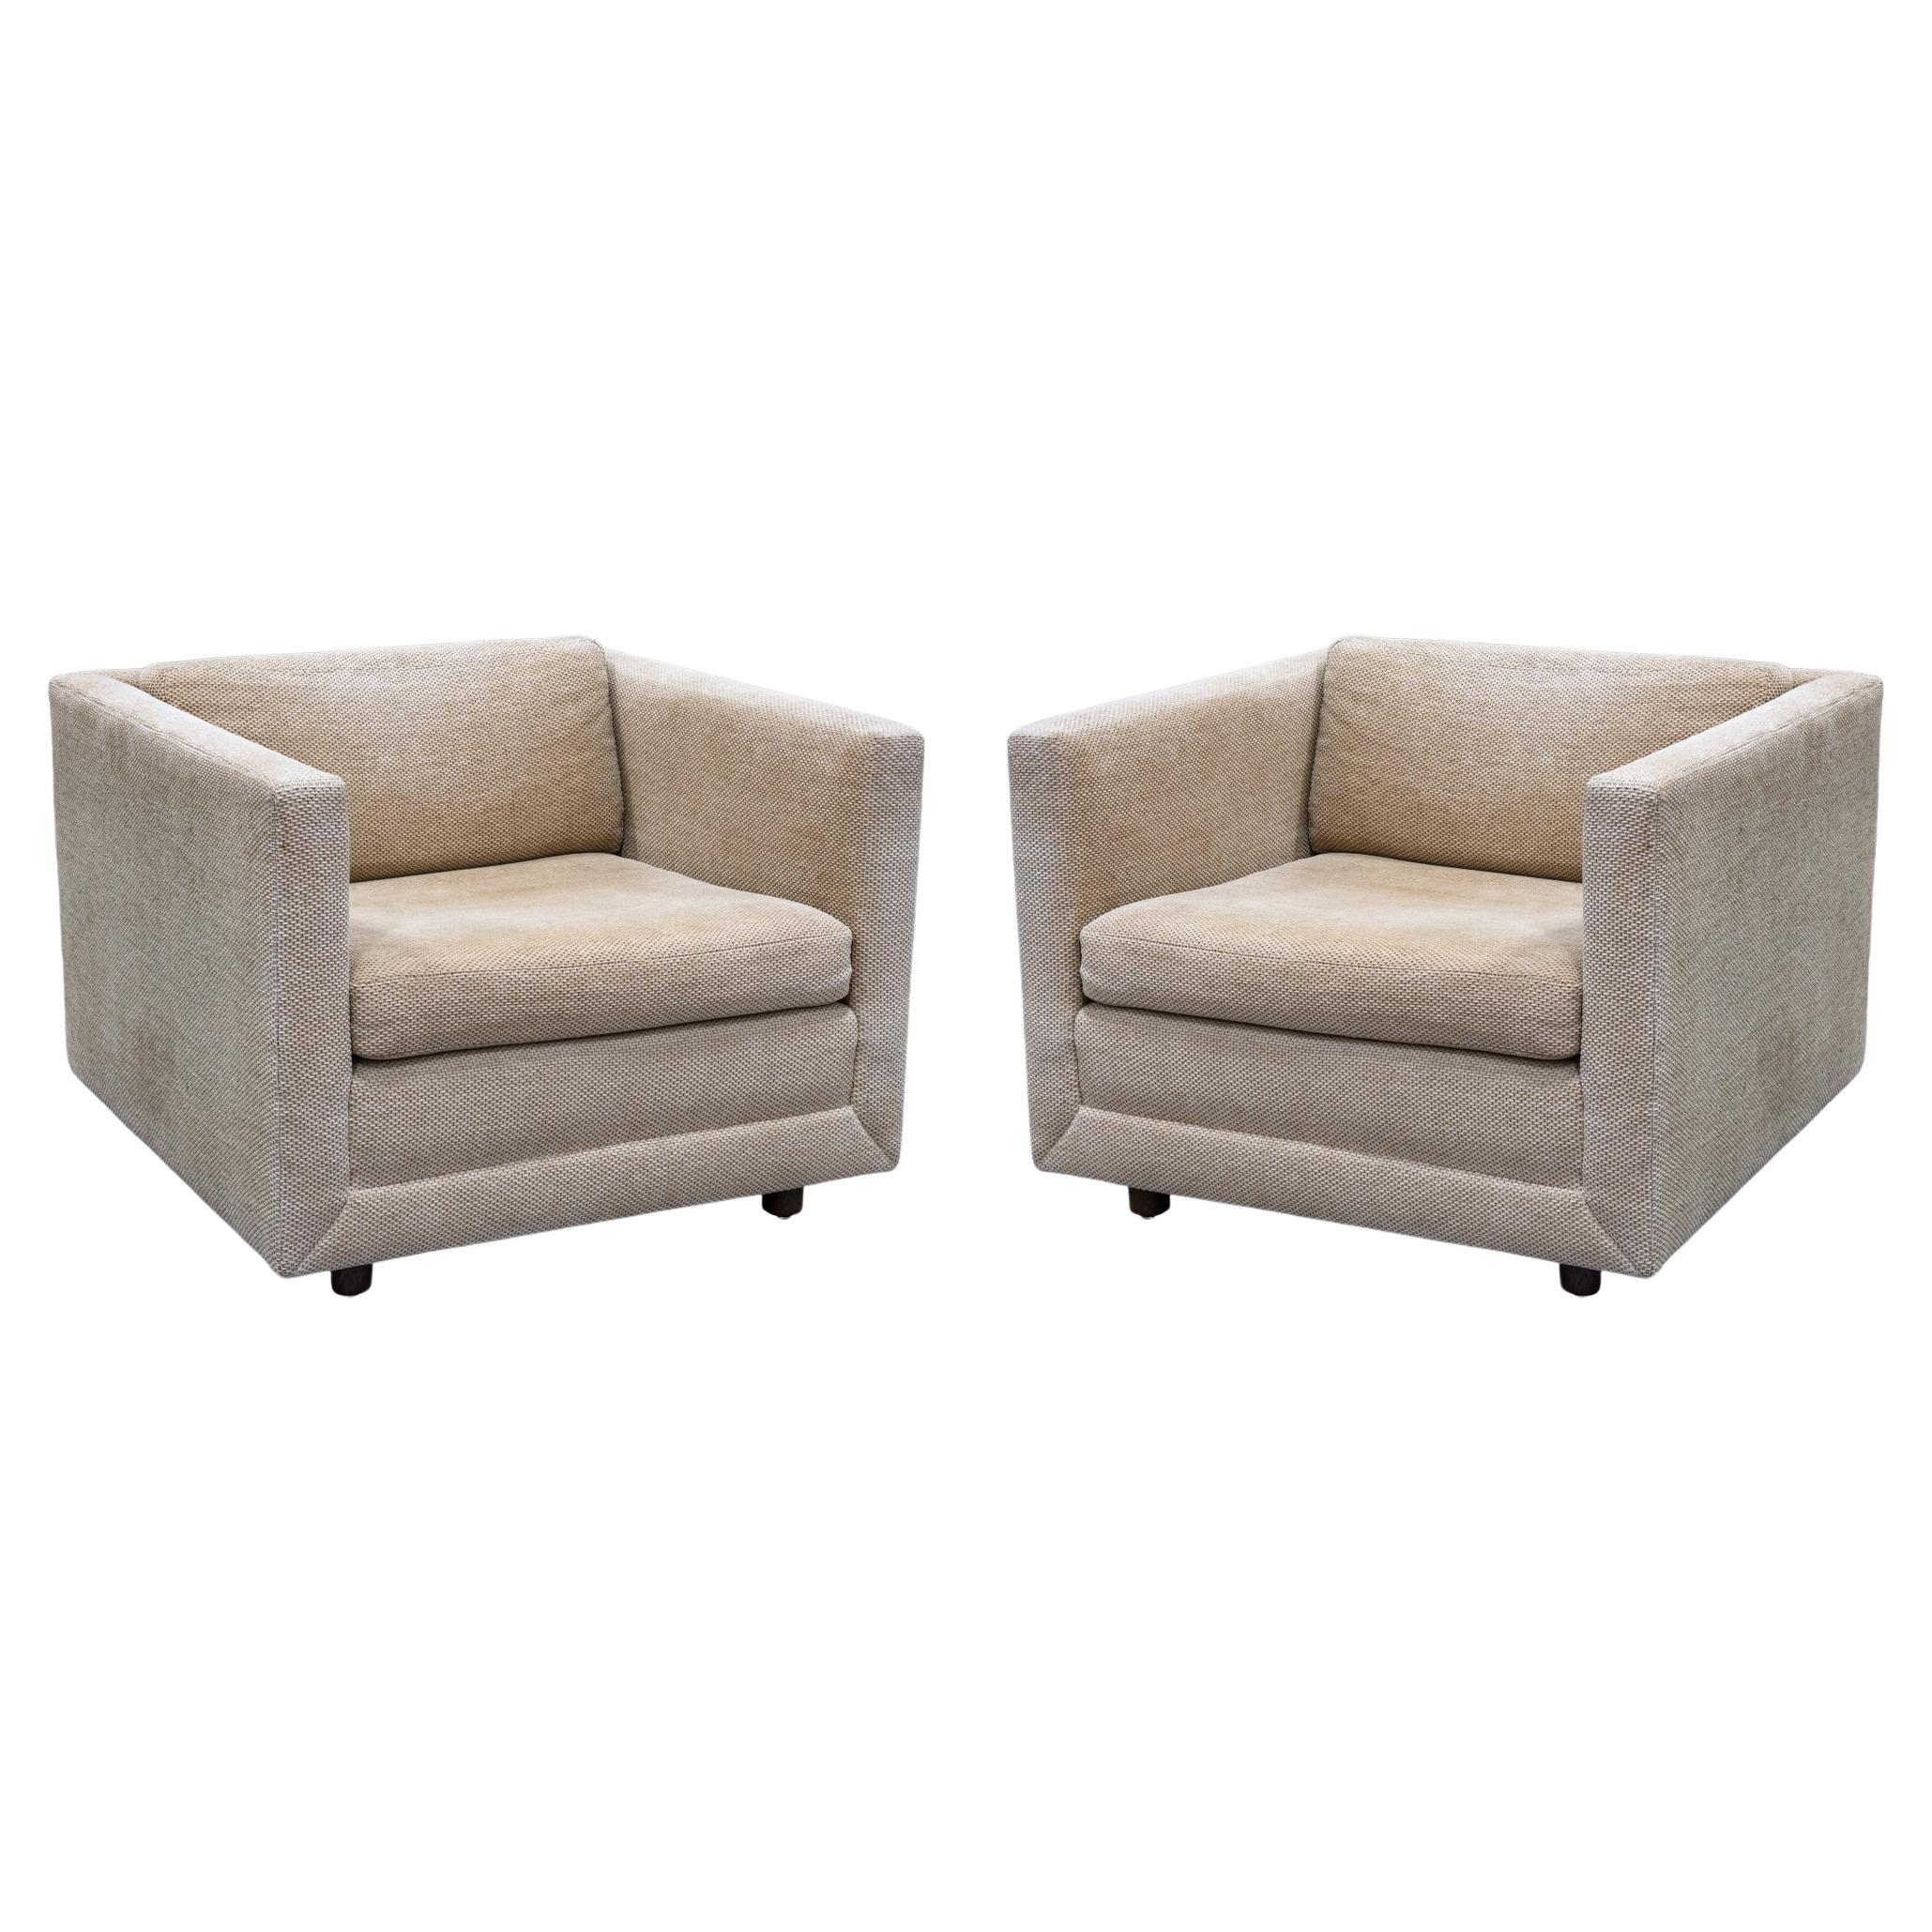 Pair of Tan Brickell Cube Accent Lounge Chairs with Wooden Legs